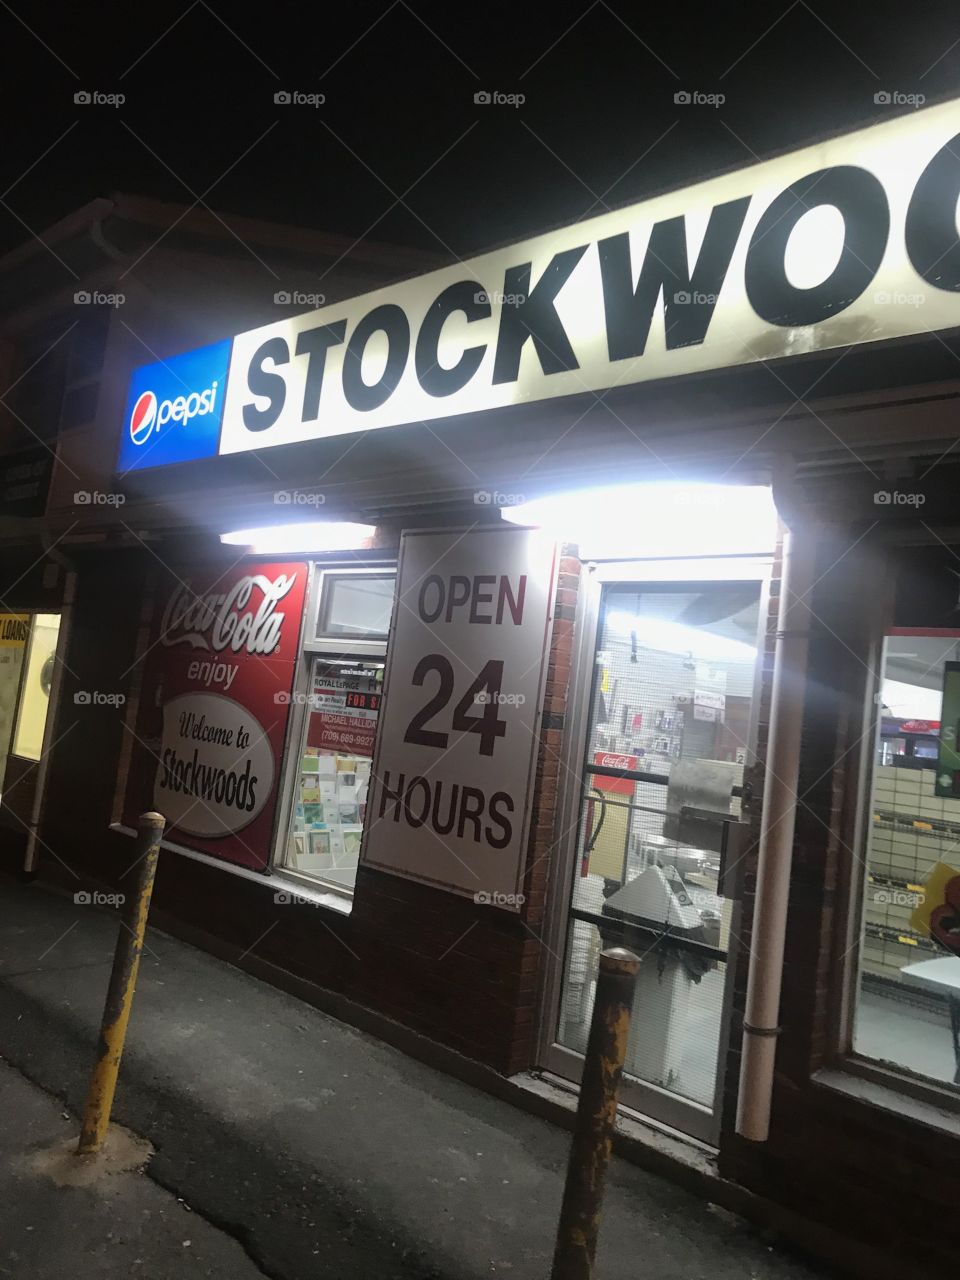 These were the signs used to entice people to stop in stockwoods convenience store 